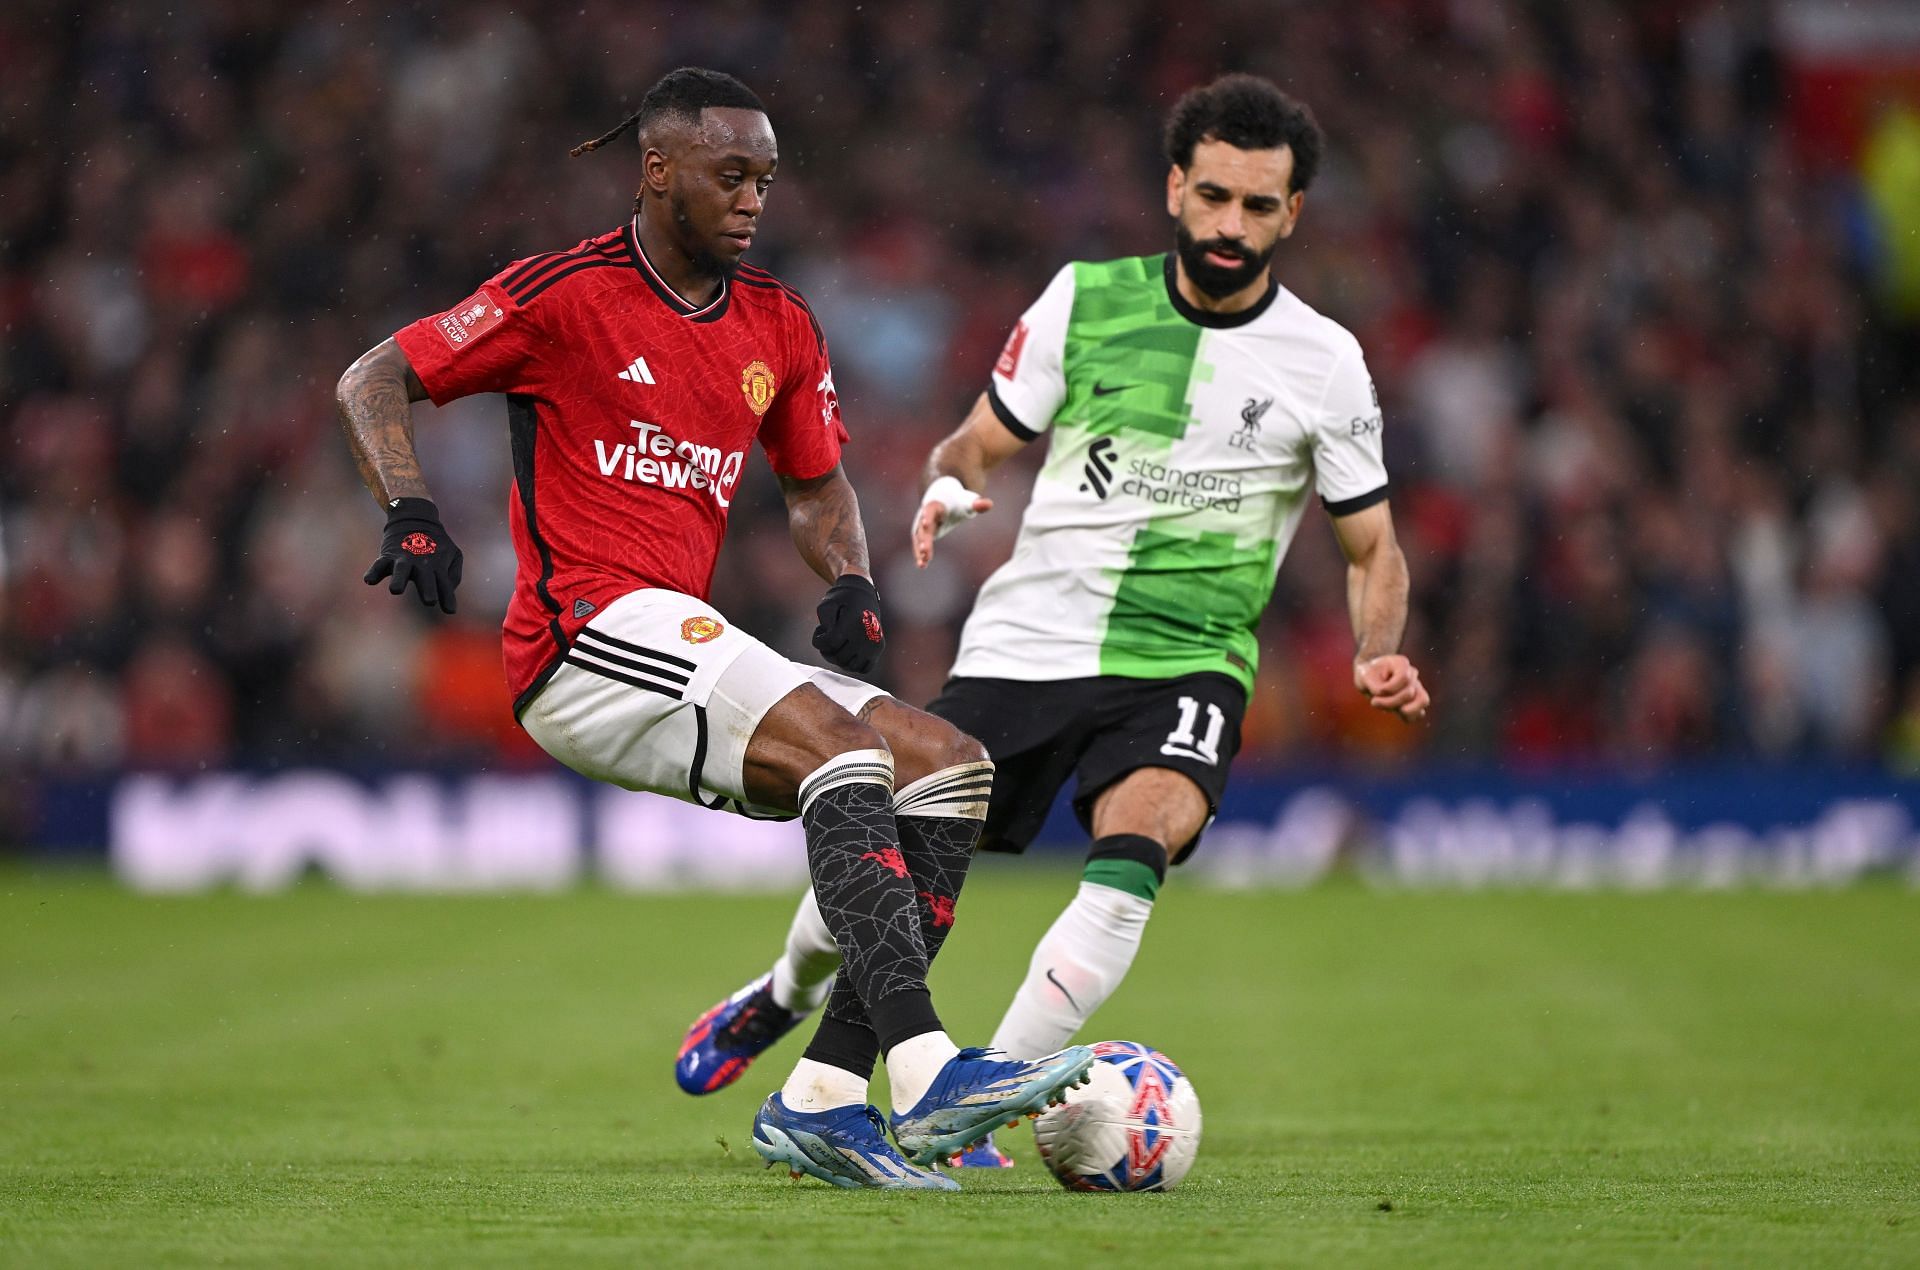 Wan-Bissaka was overall unimpressive in the clash.